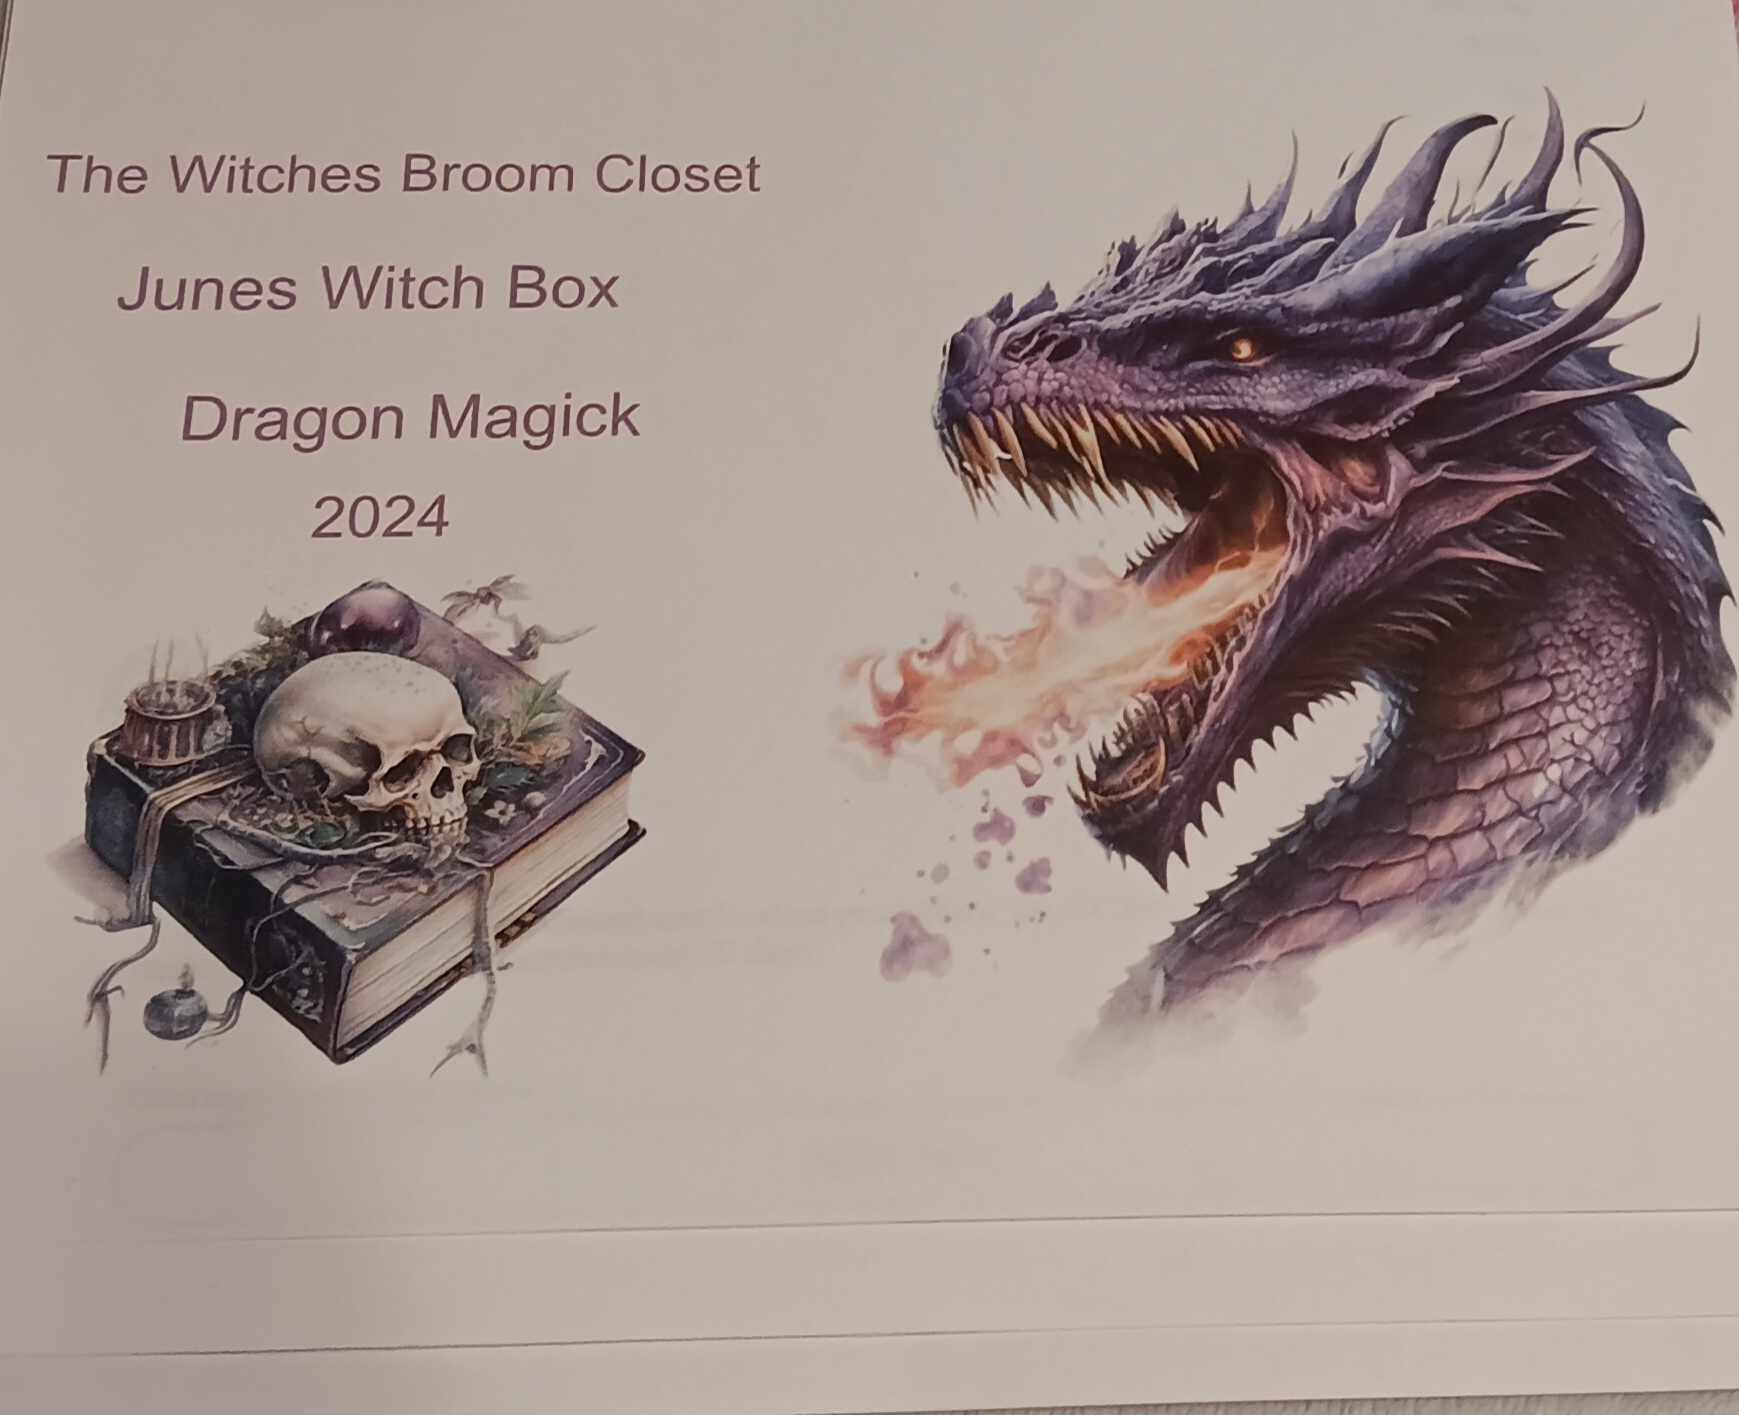 The Witches Broom Closet Witch Box *PRE-ORDER* (June 2024) Dragon Magick Witch Box